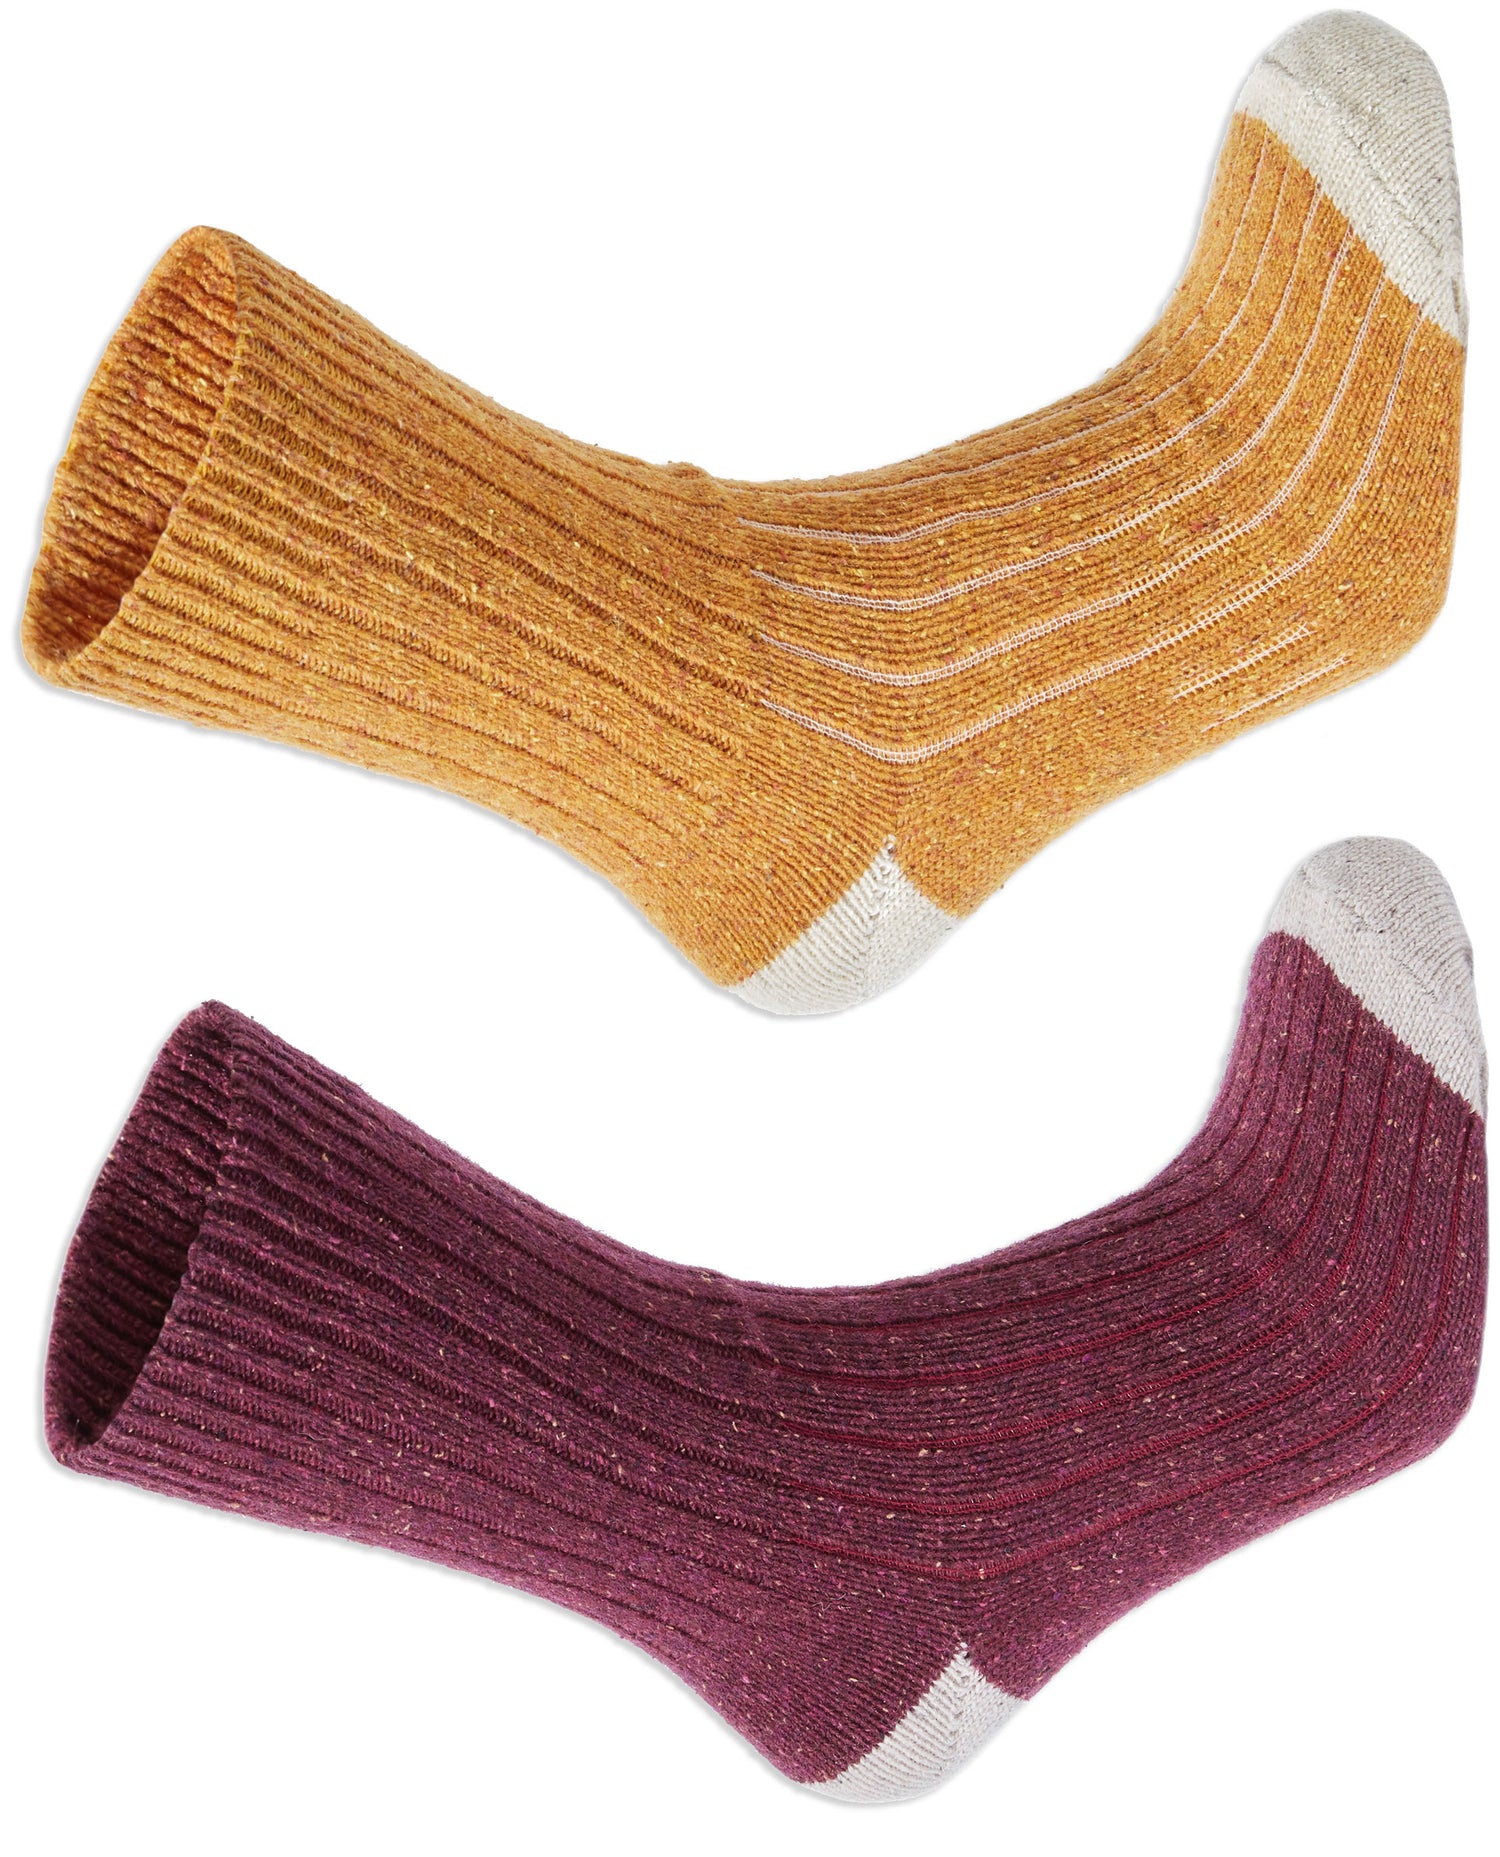 Craghoppers Nevis Ladies Walking Socks | Spiced Copper, Wildberry